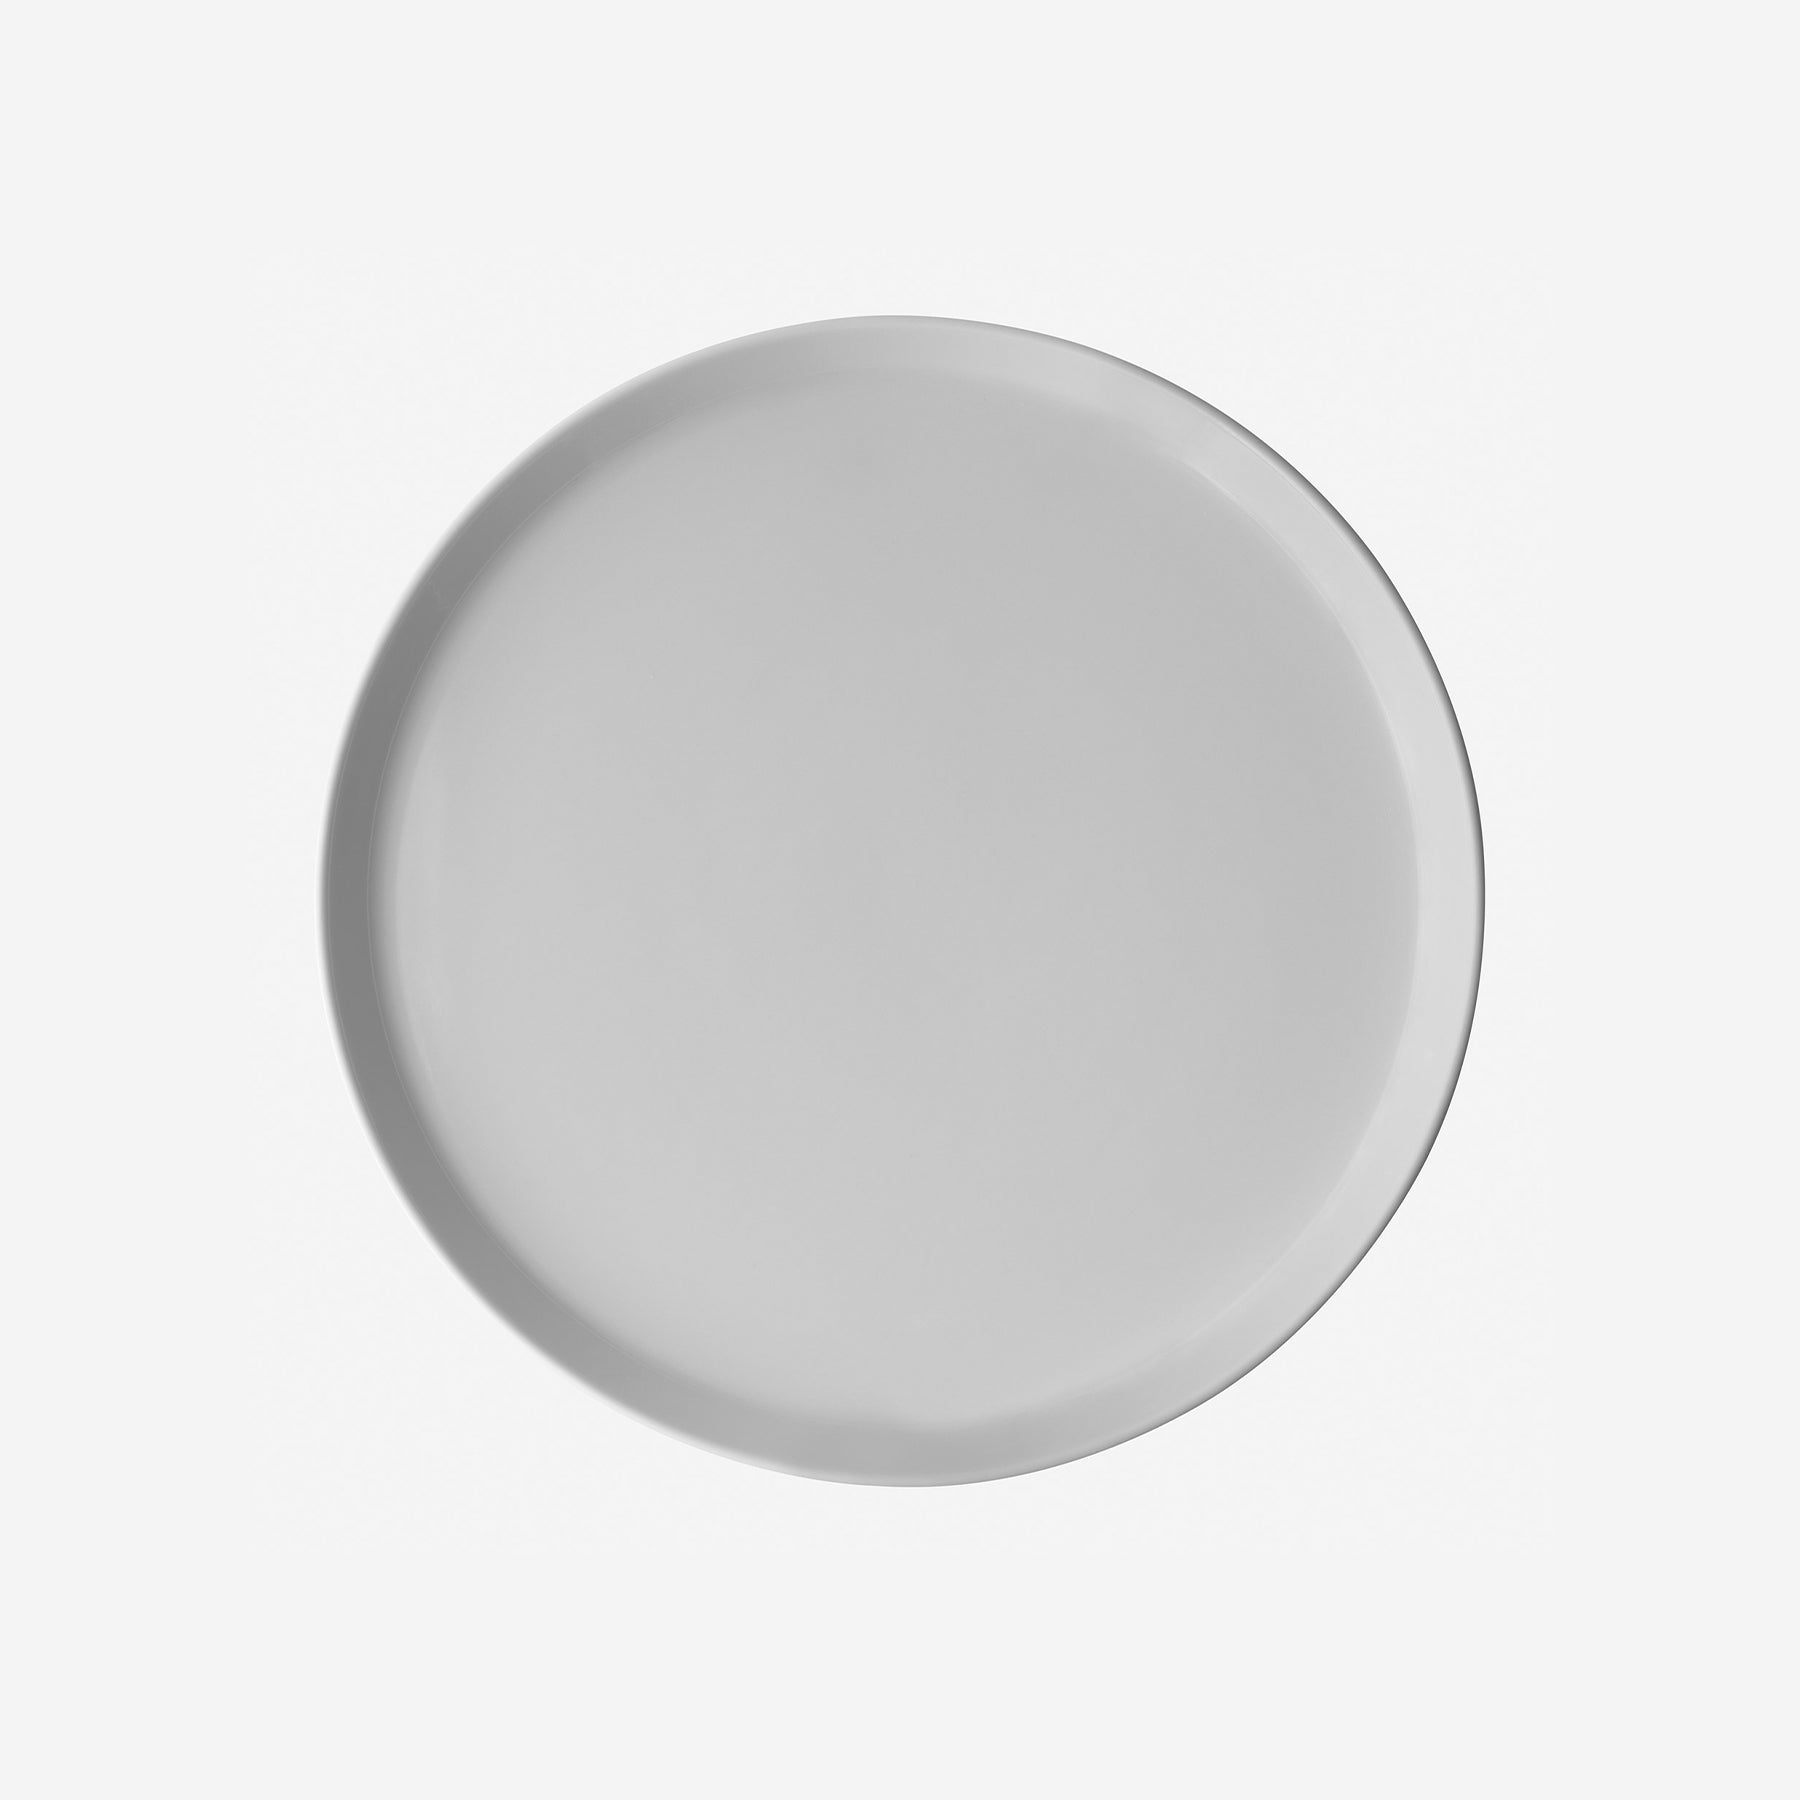 Vipp 212 Hand Casted Lunch Plate 2pcs